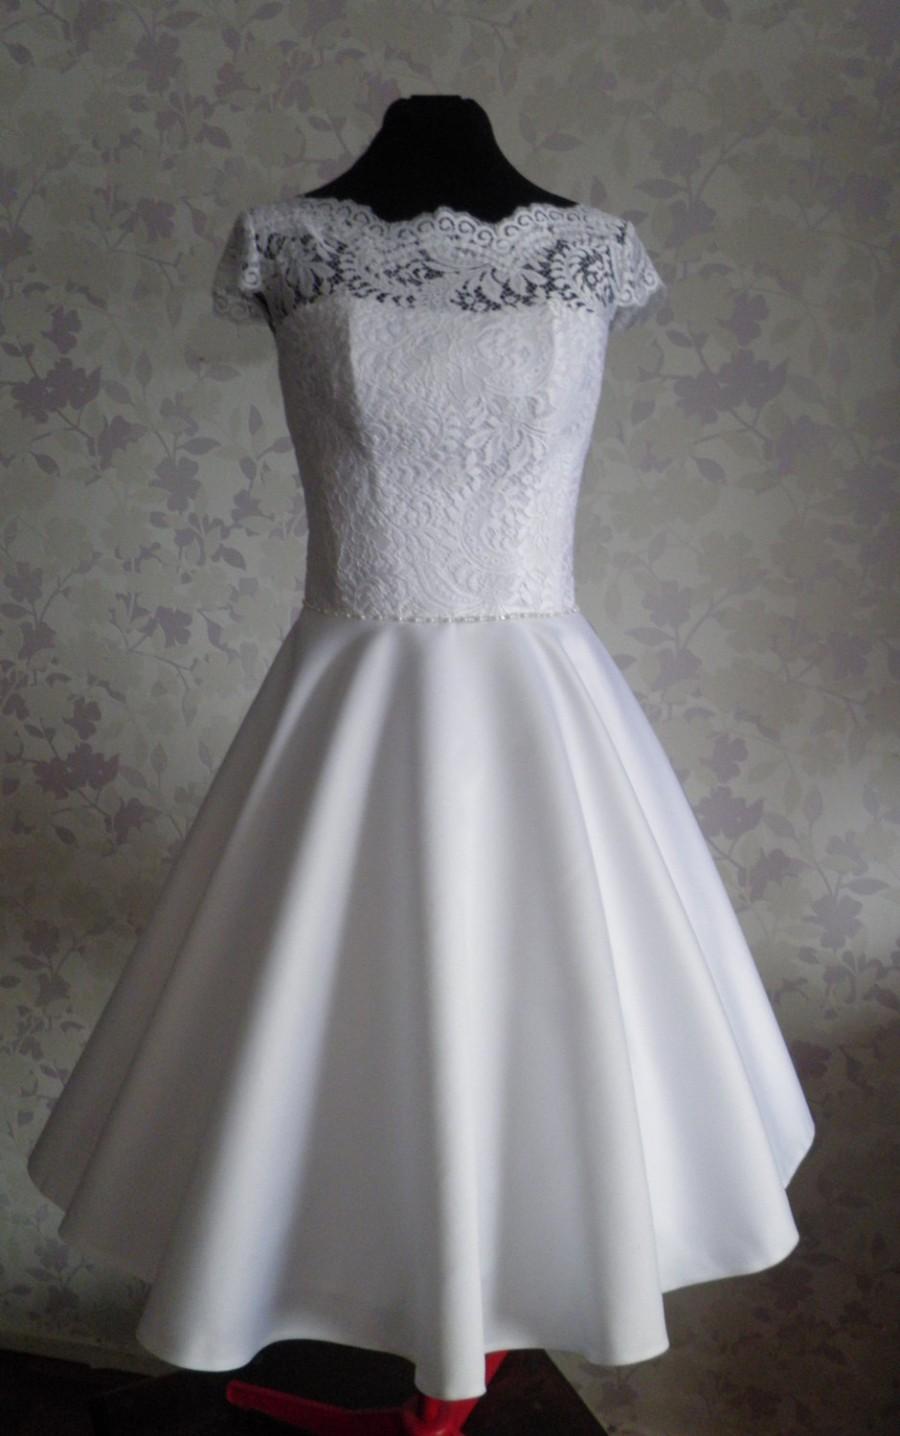 Wedding - Vintage Inspired Wedding Dress in style of Audrey Hepburn 1950 with Tea Length Skirt, Illusion Neckline, Lace Corset, V Shaped Back Cutout